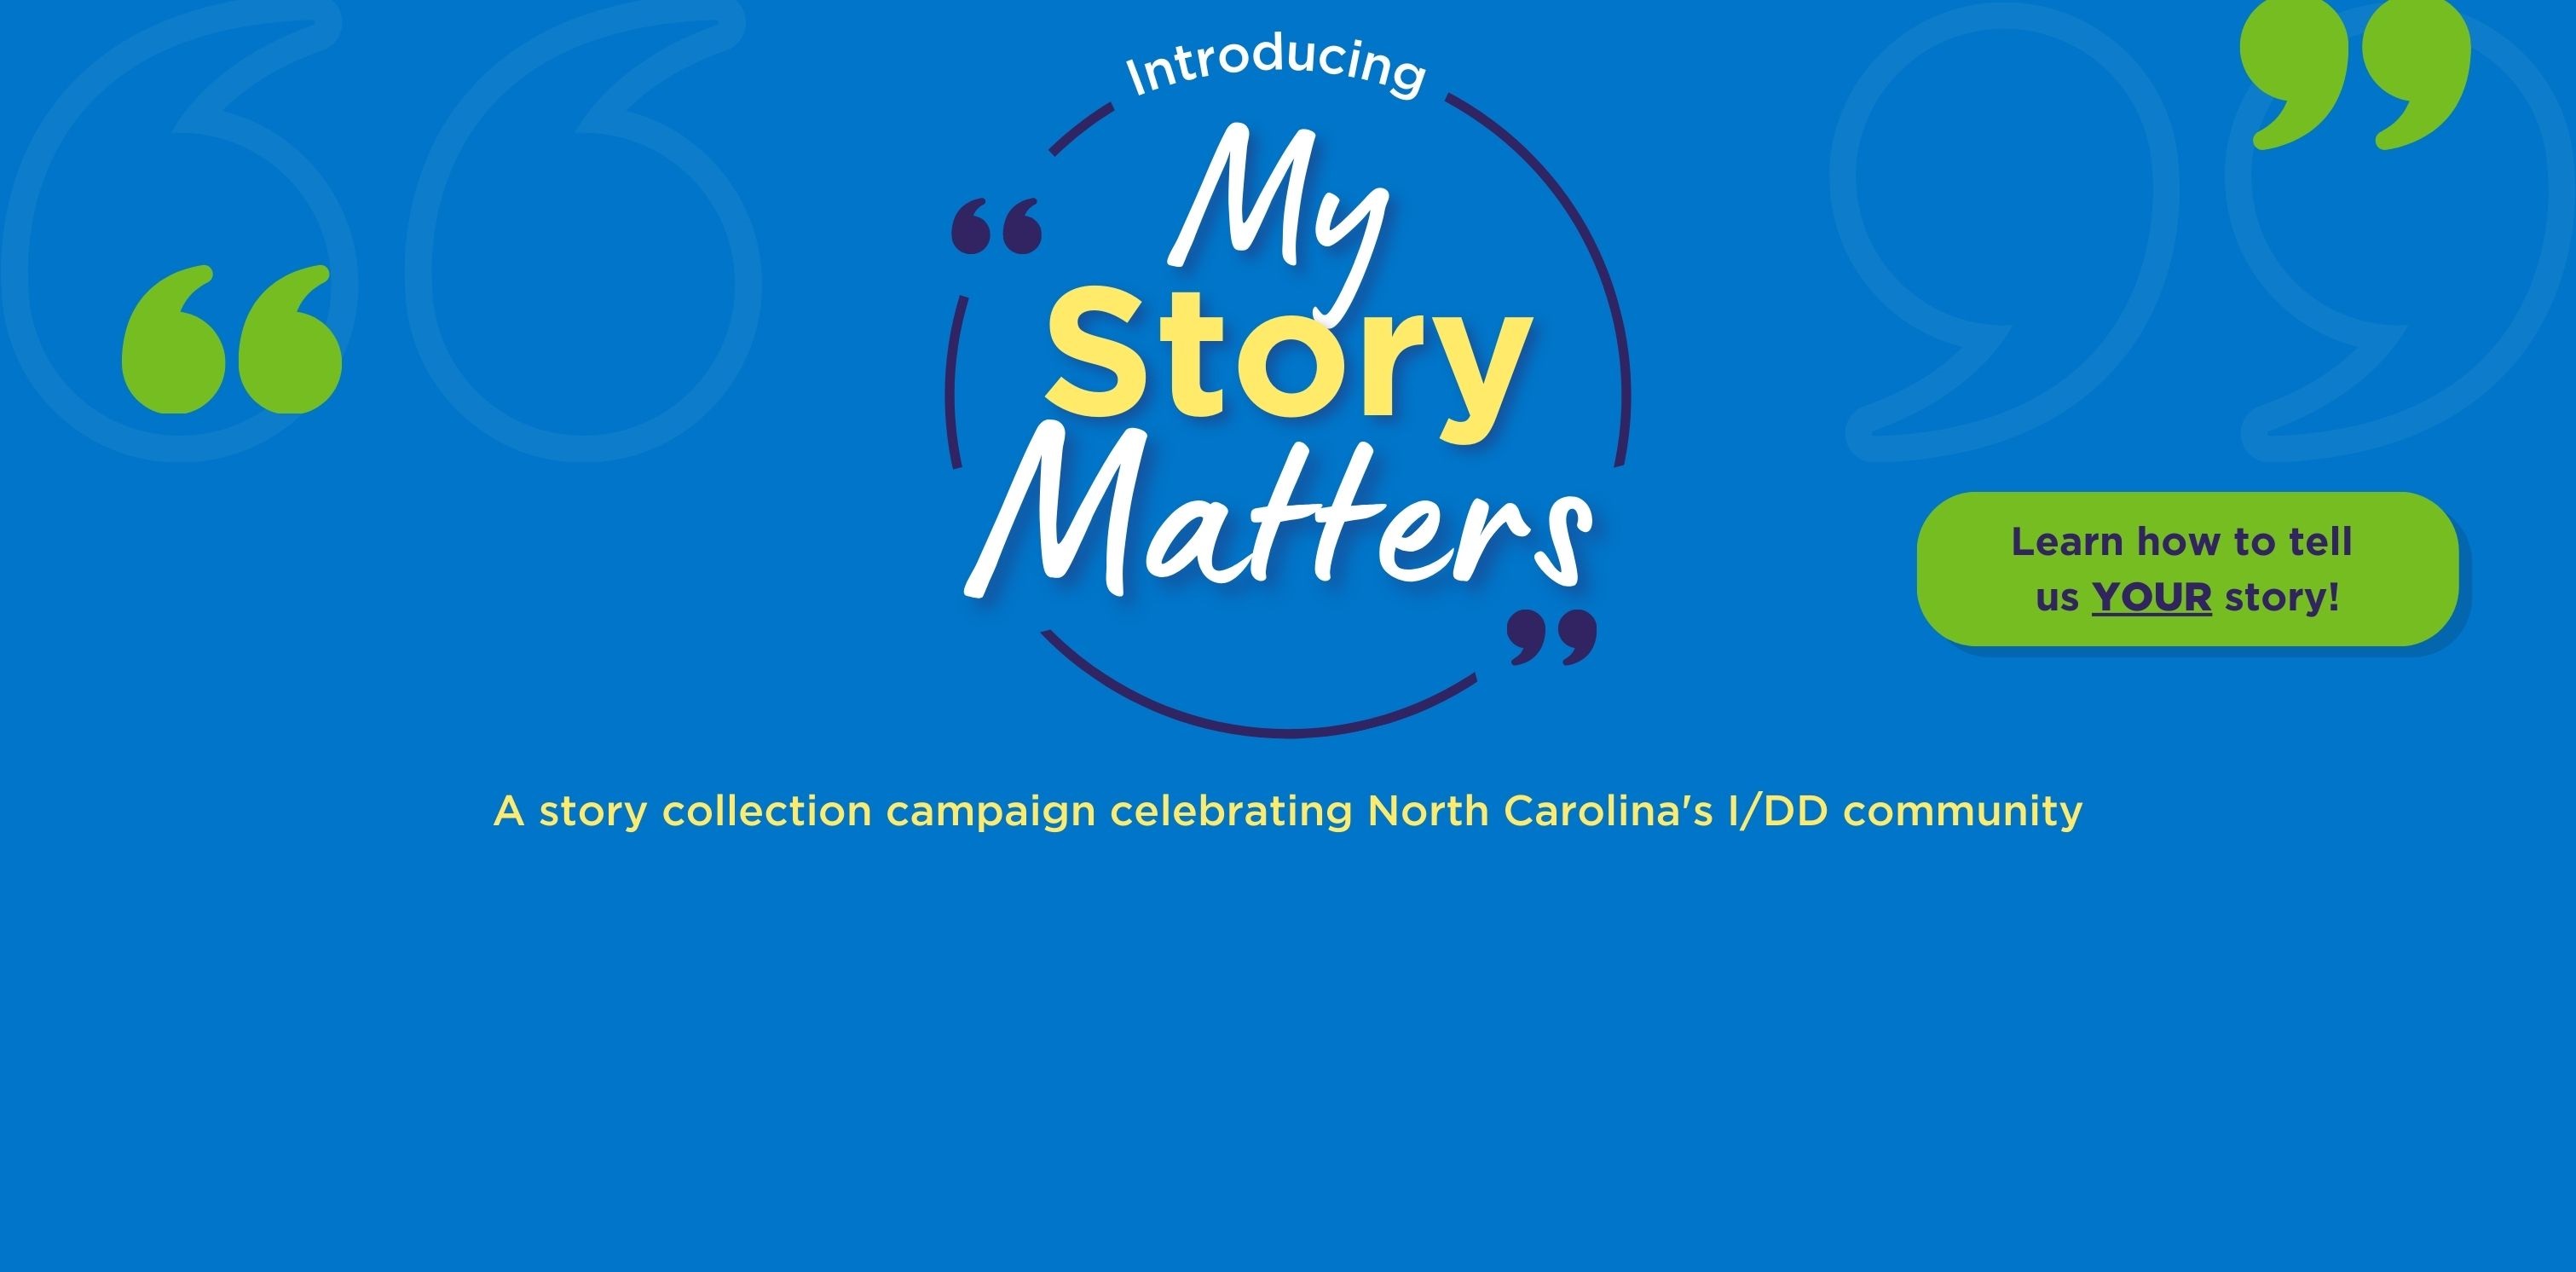 Introducing the My Story Matters  -  A story collection campaign.